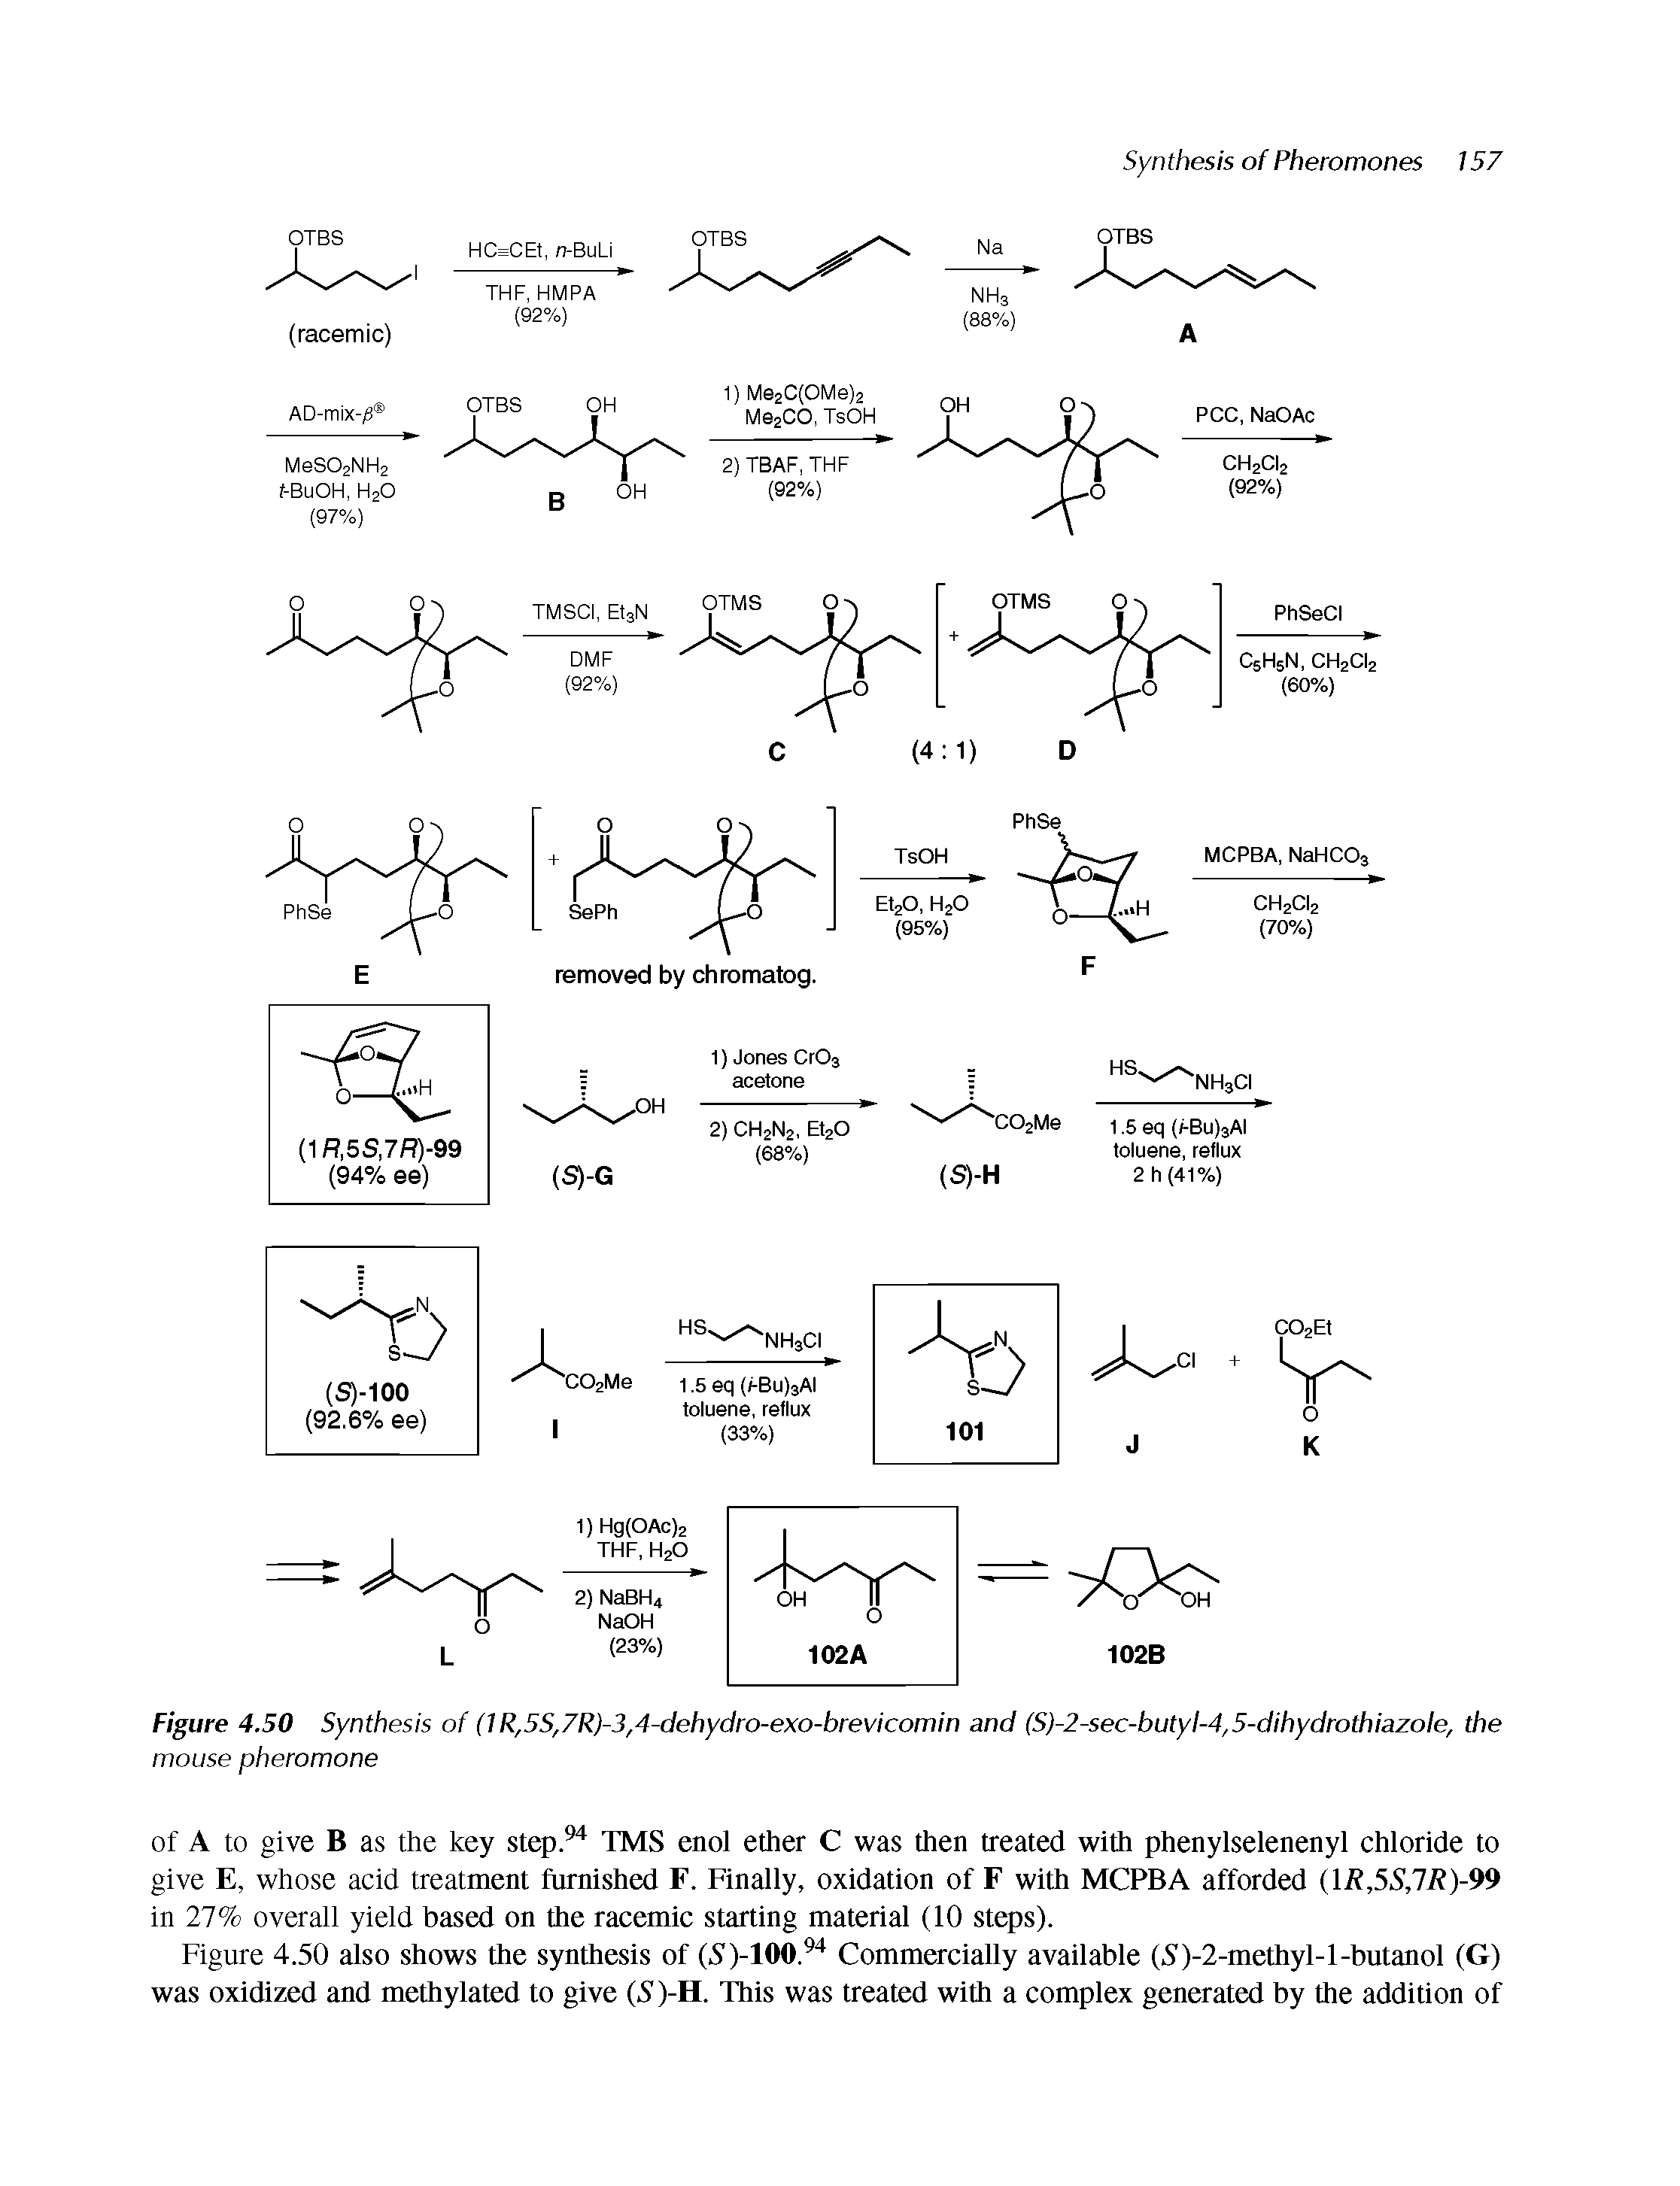 Figure 4.50 Synthesis of (1 R,5S,7R)-3,4-dehydro-exo-brevicomin and (S)-2-sec-butyl-4,5-dihydrothiazole, the mouse pheromone...